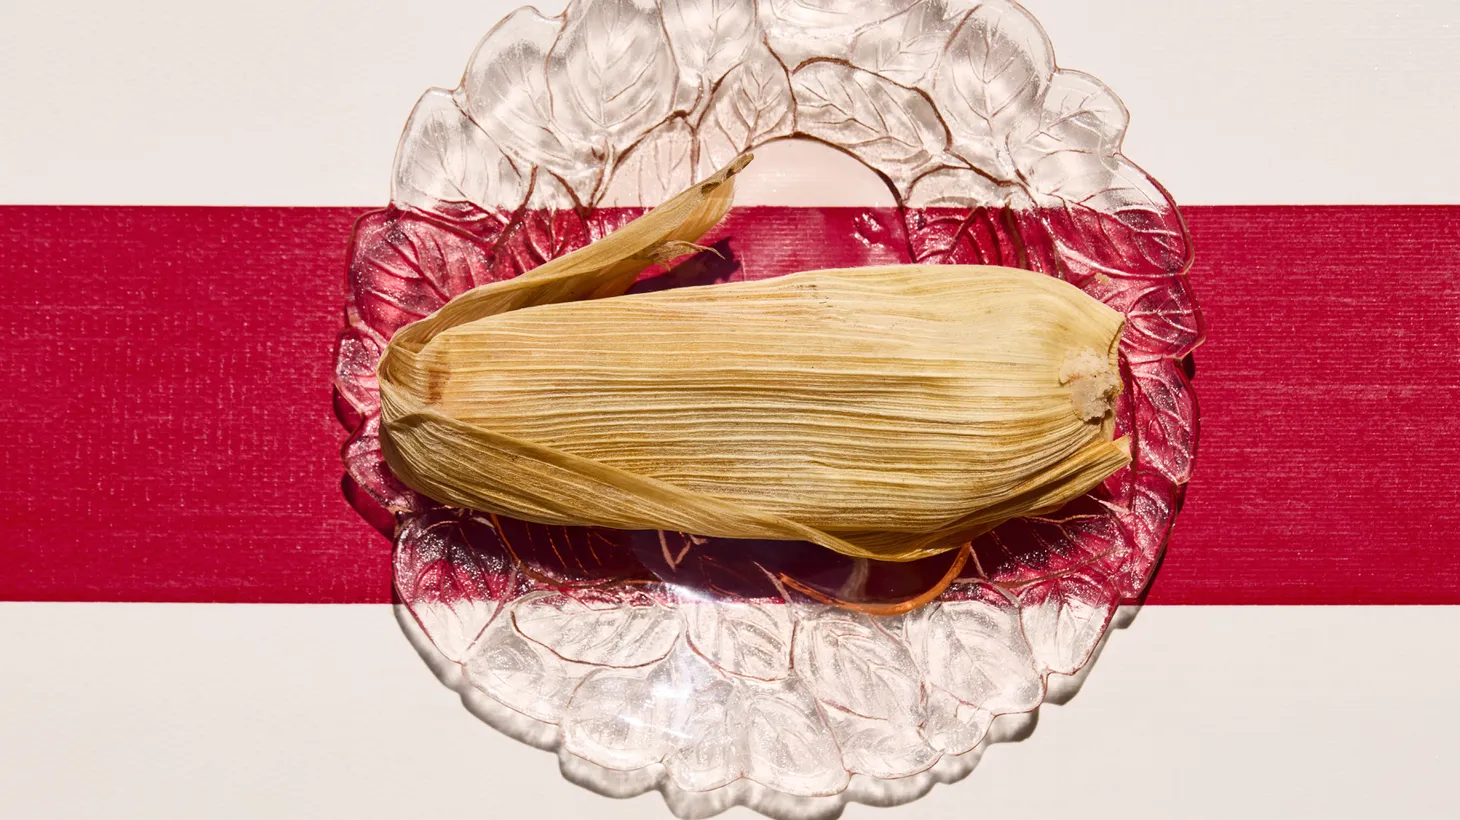 "The masa that comes from corn, has been dated to 9,000 years ago," says culinary anthropologist Claudia Serrato.